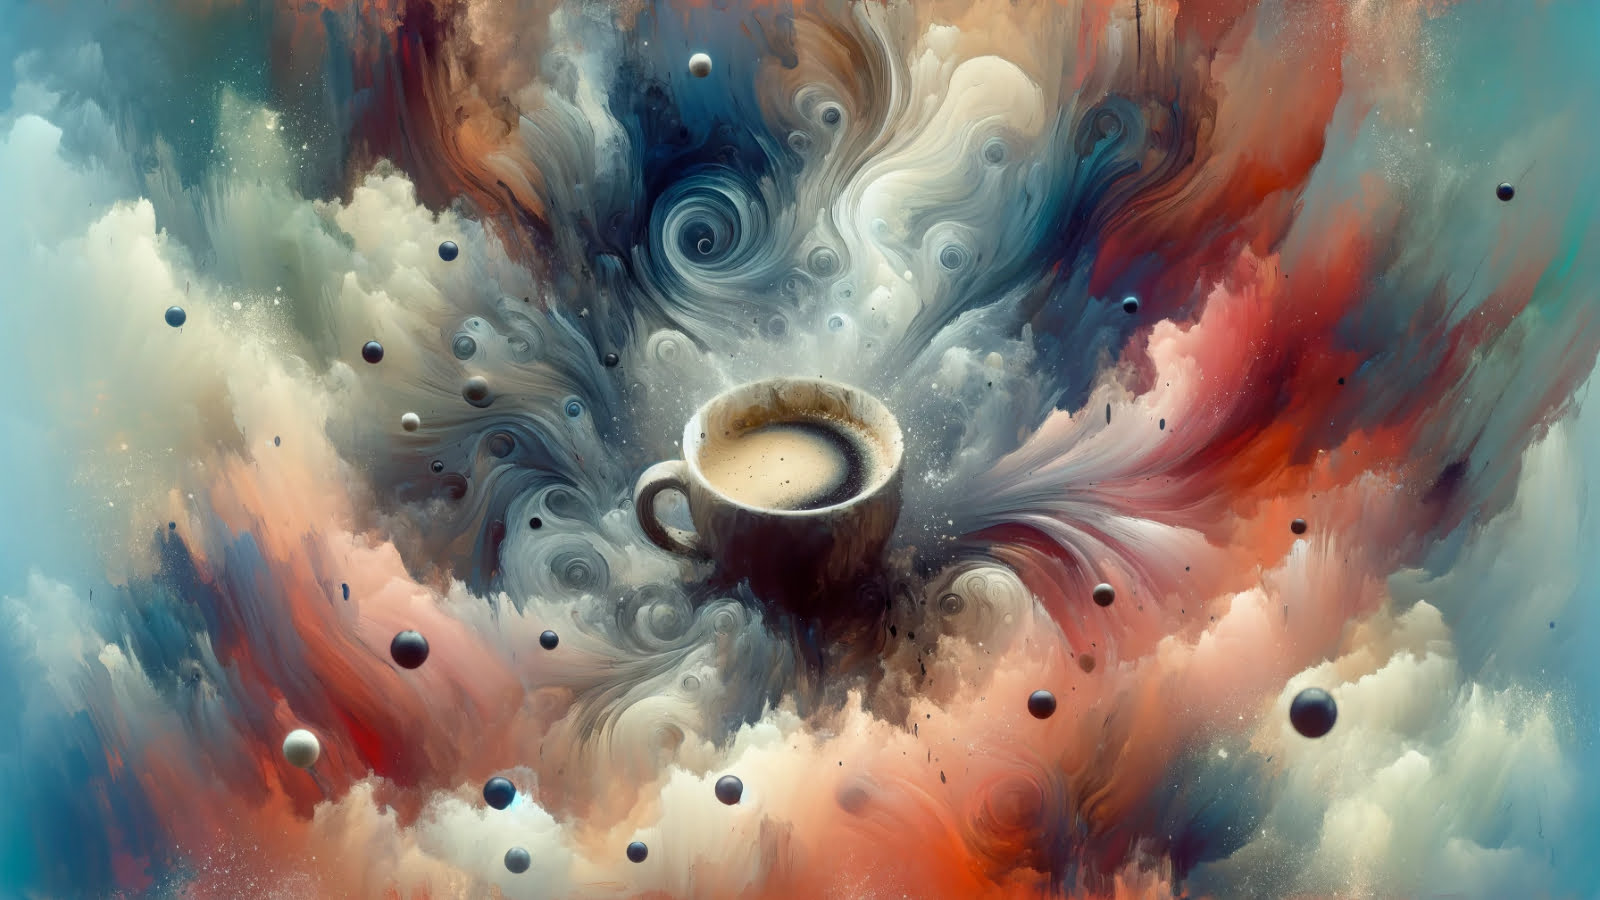 A surreal, abstract representation of the body's process in eliminating caffeine.